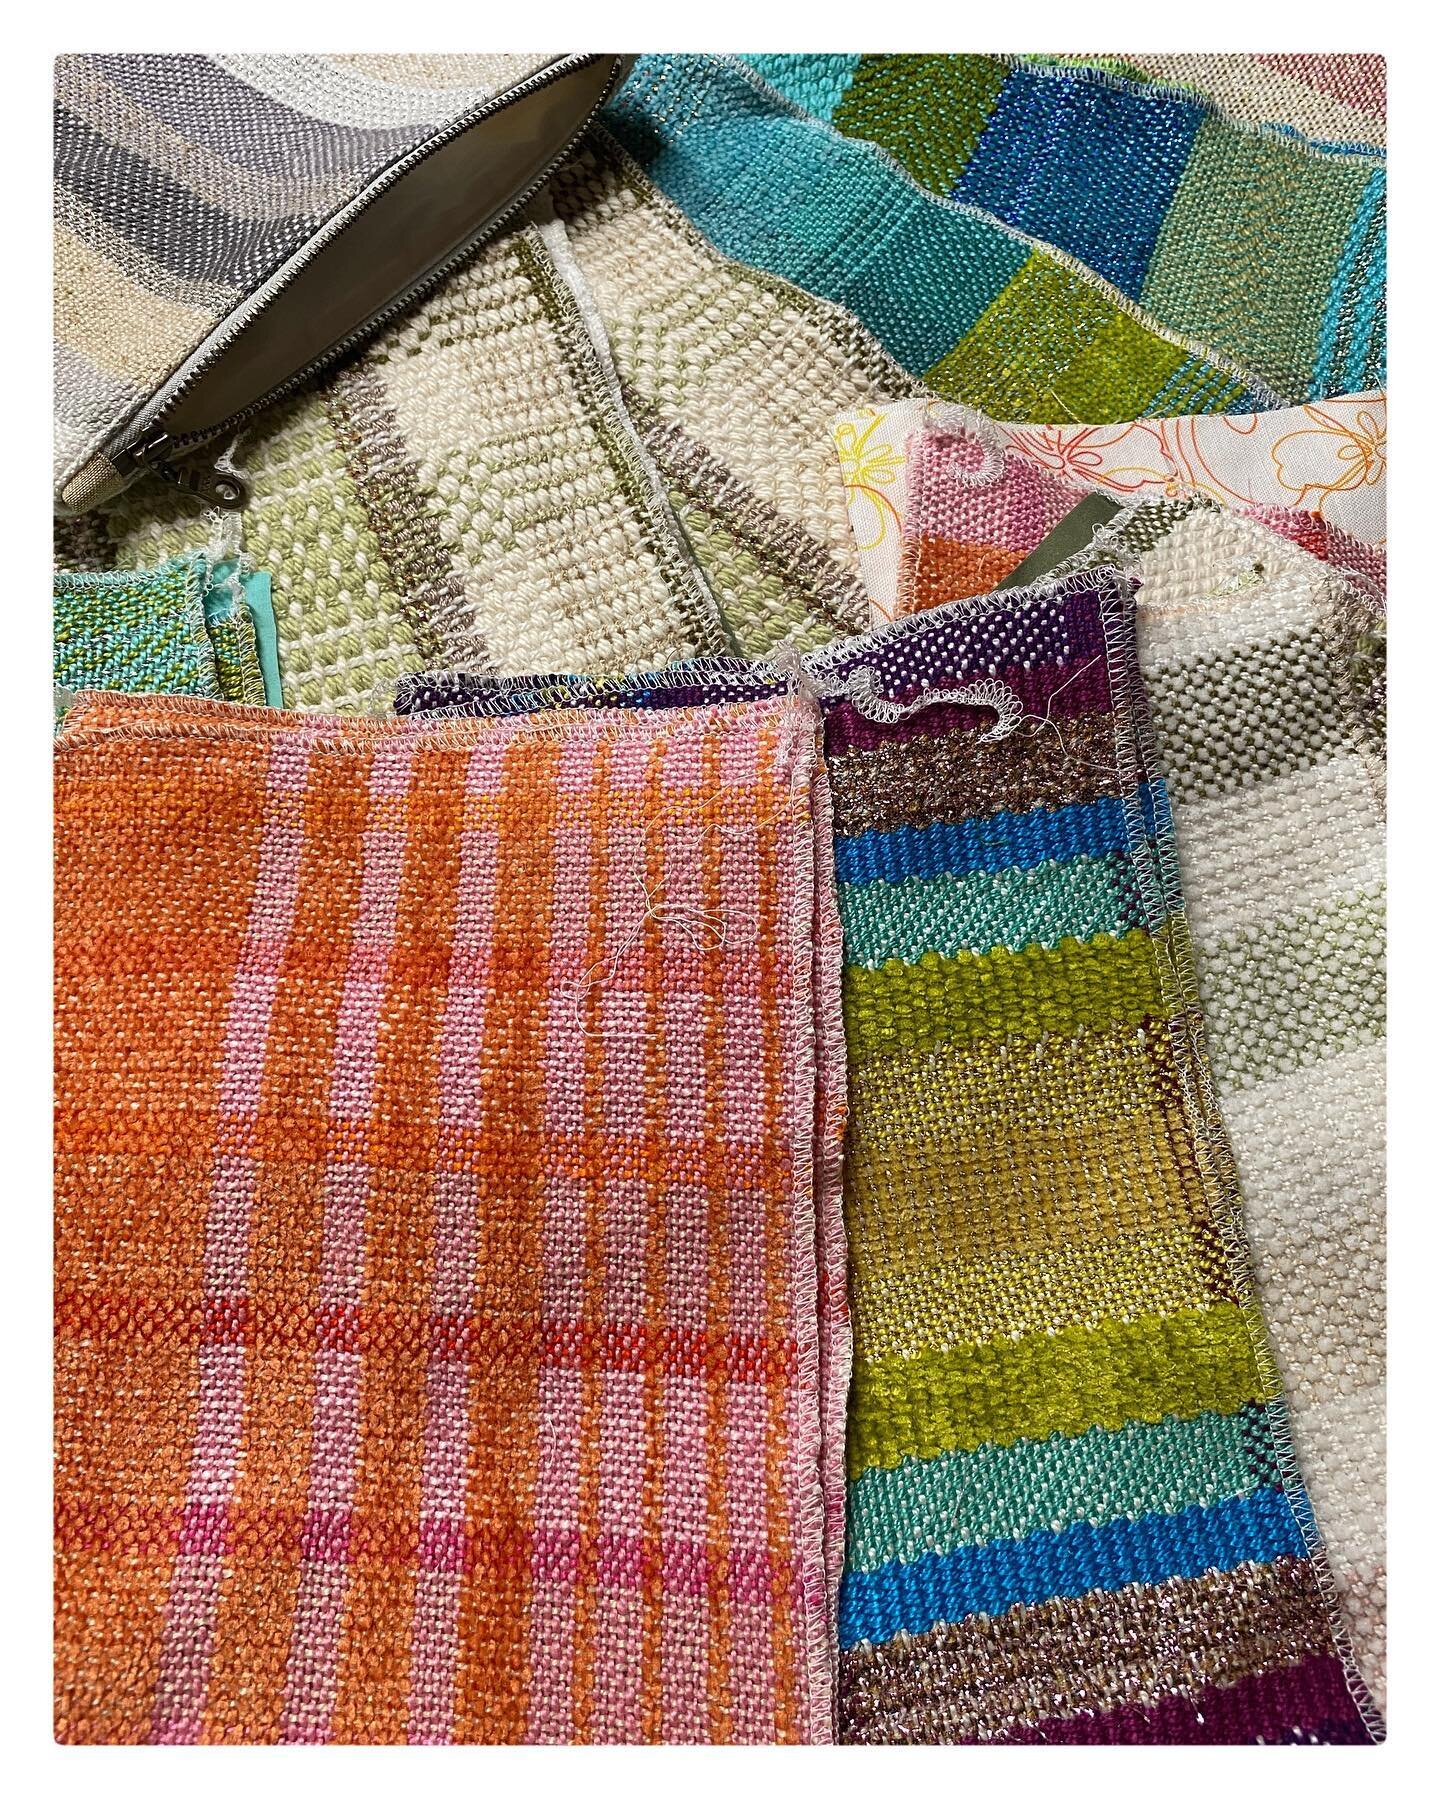 New batch of handwoven zipper pouches in the works. 
#comingsoon 

These are woven from the last 10&rdquo;-12&rdquo; of a warp and it&rsquo;s a chance to play with novelty yarns and play with different weave structures here. 

#handwoven #handwovente